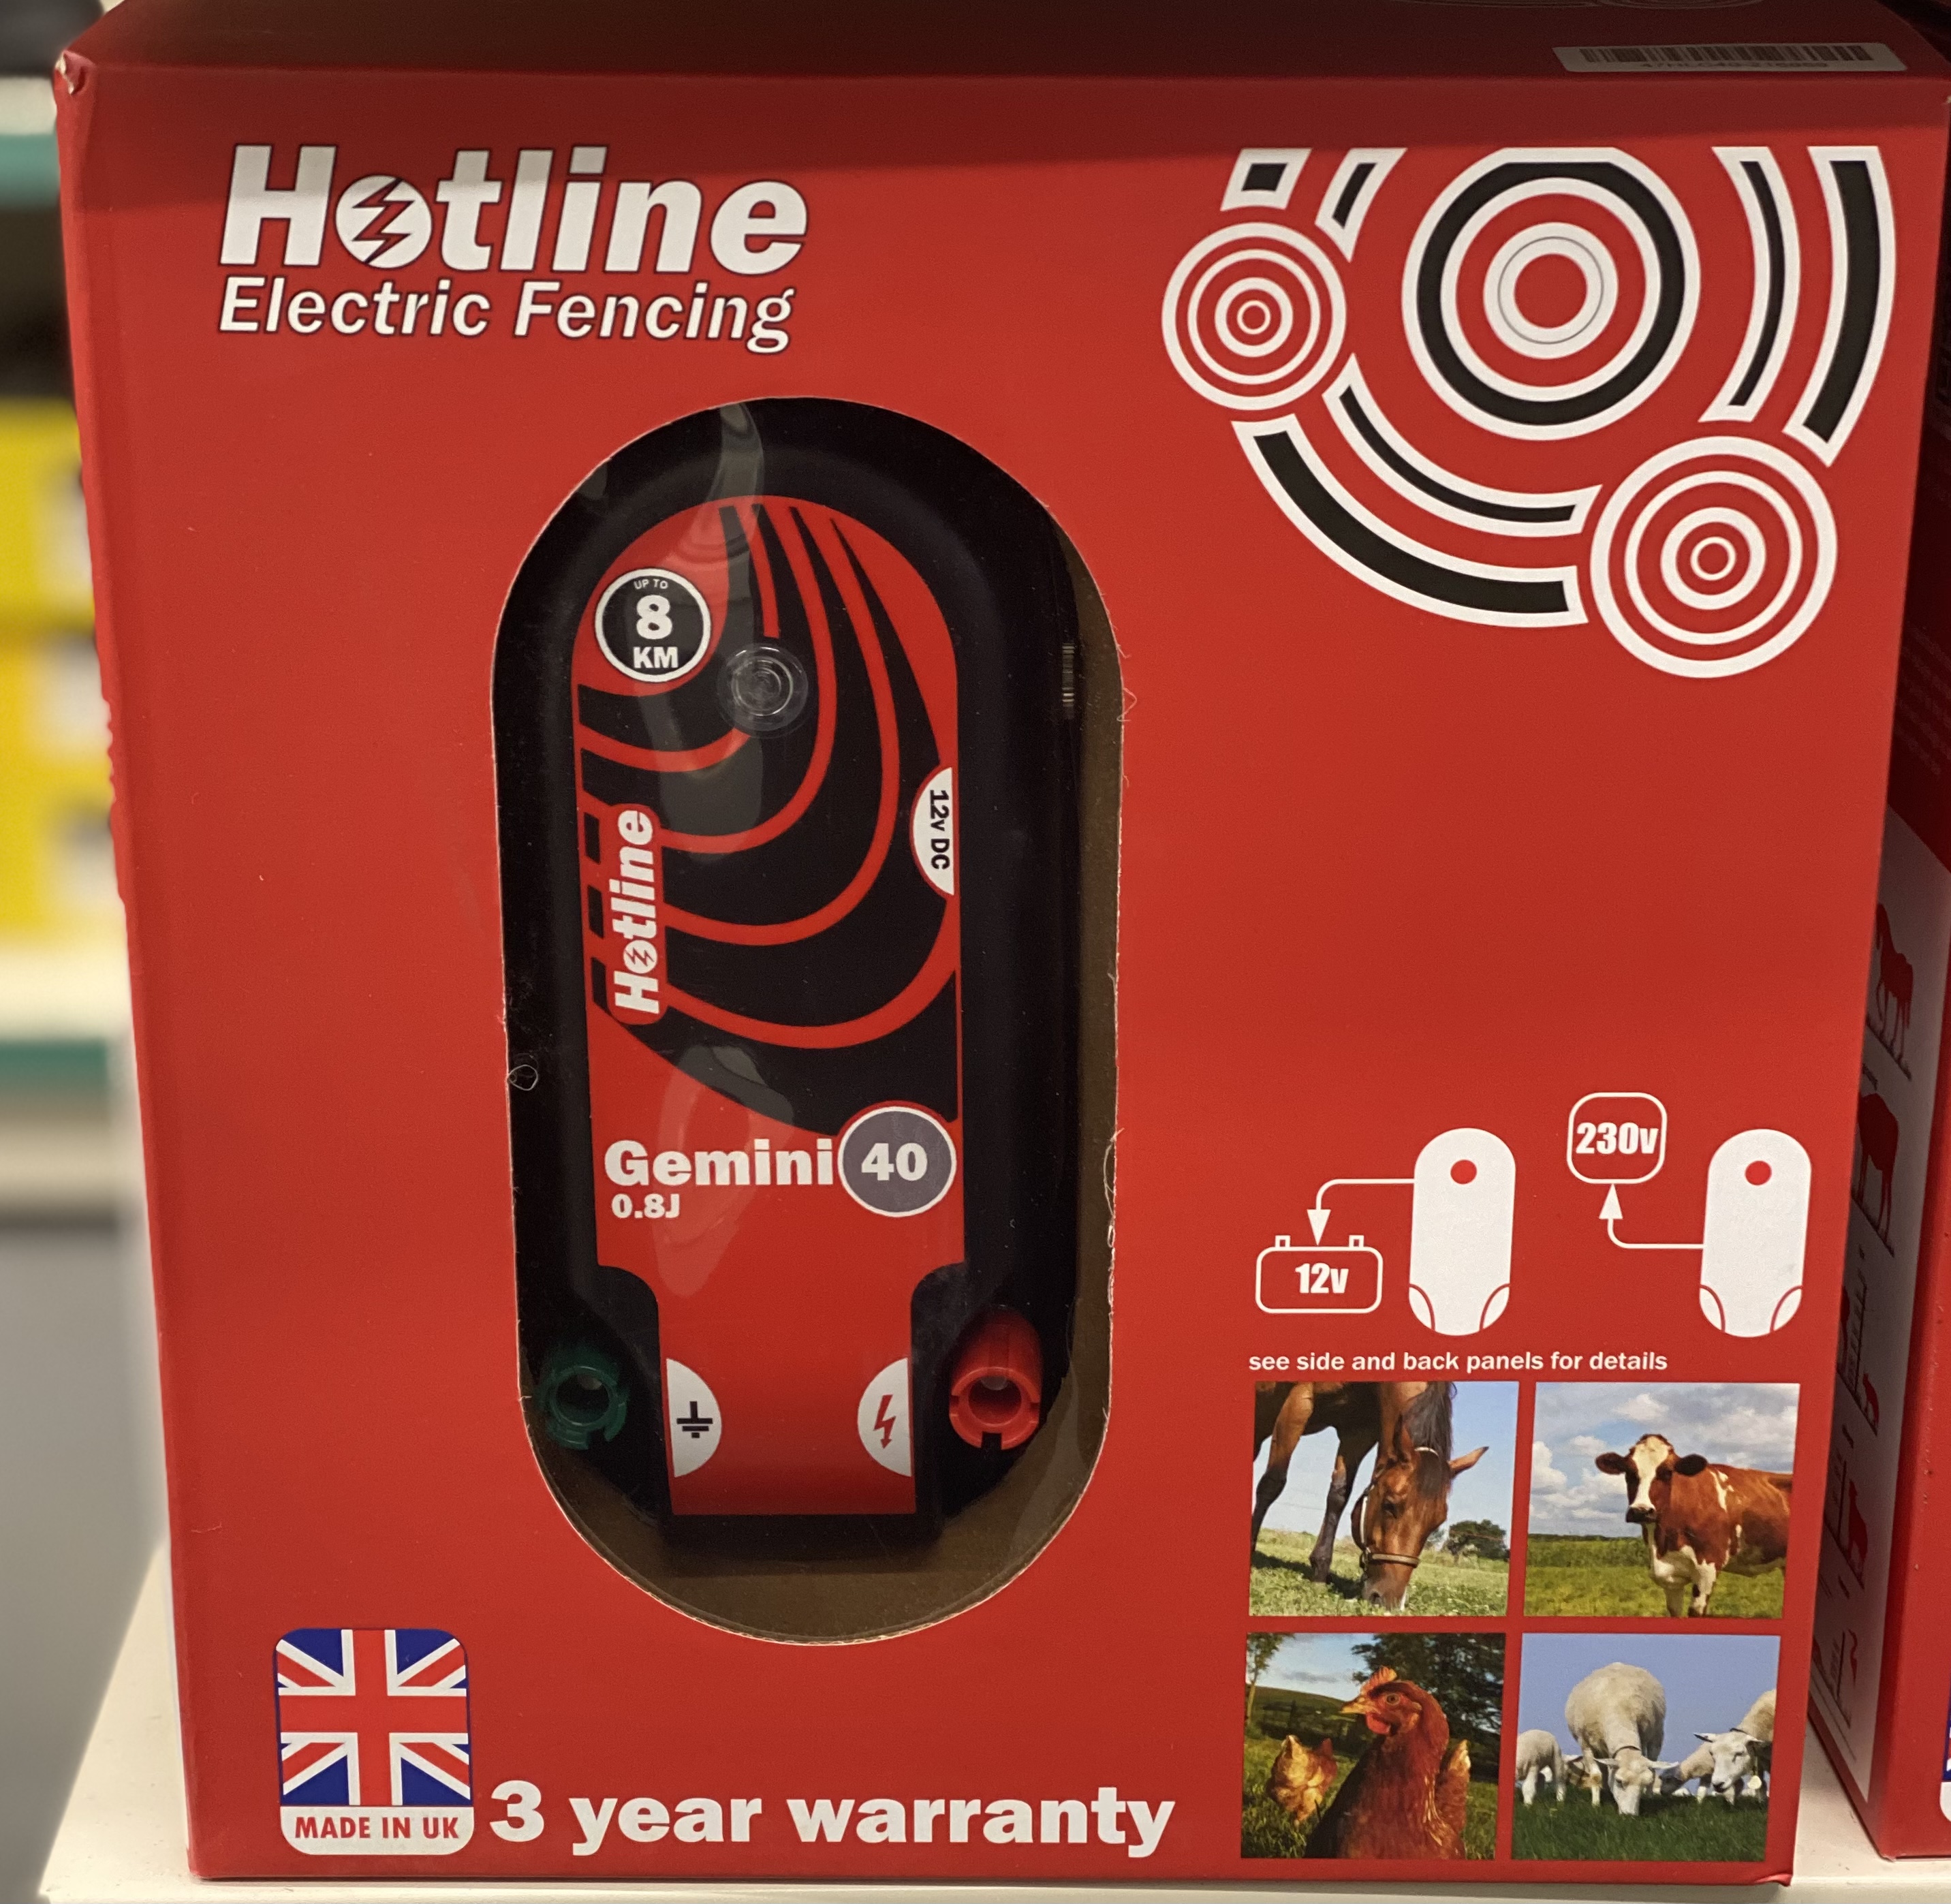 Electric Fencing